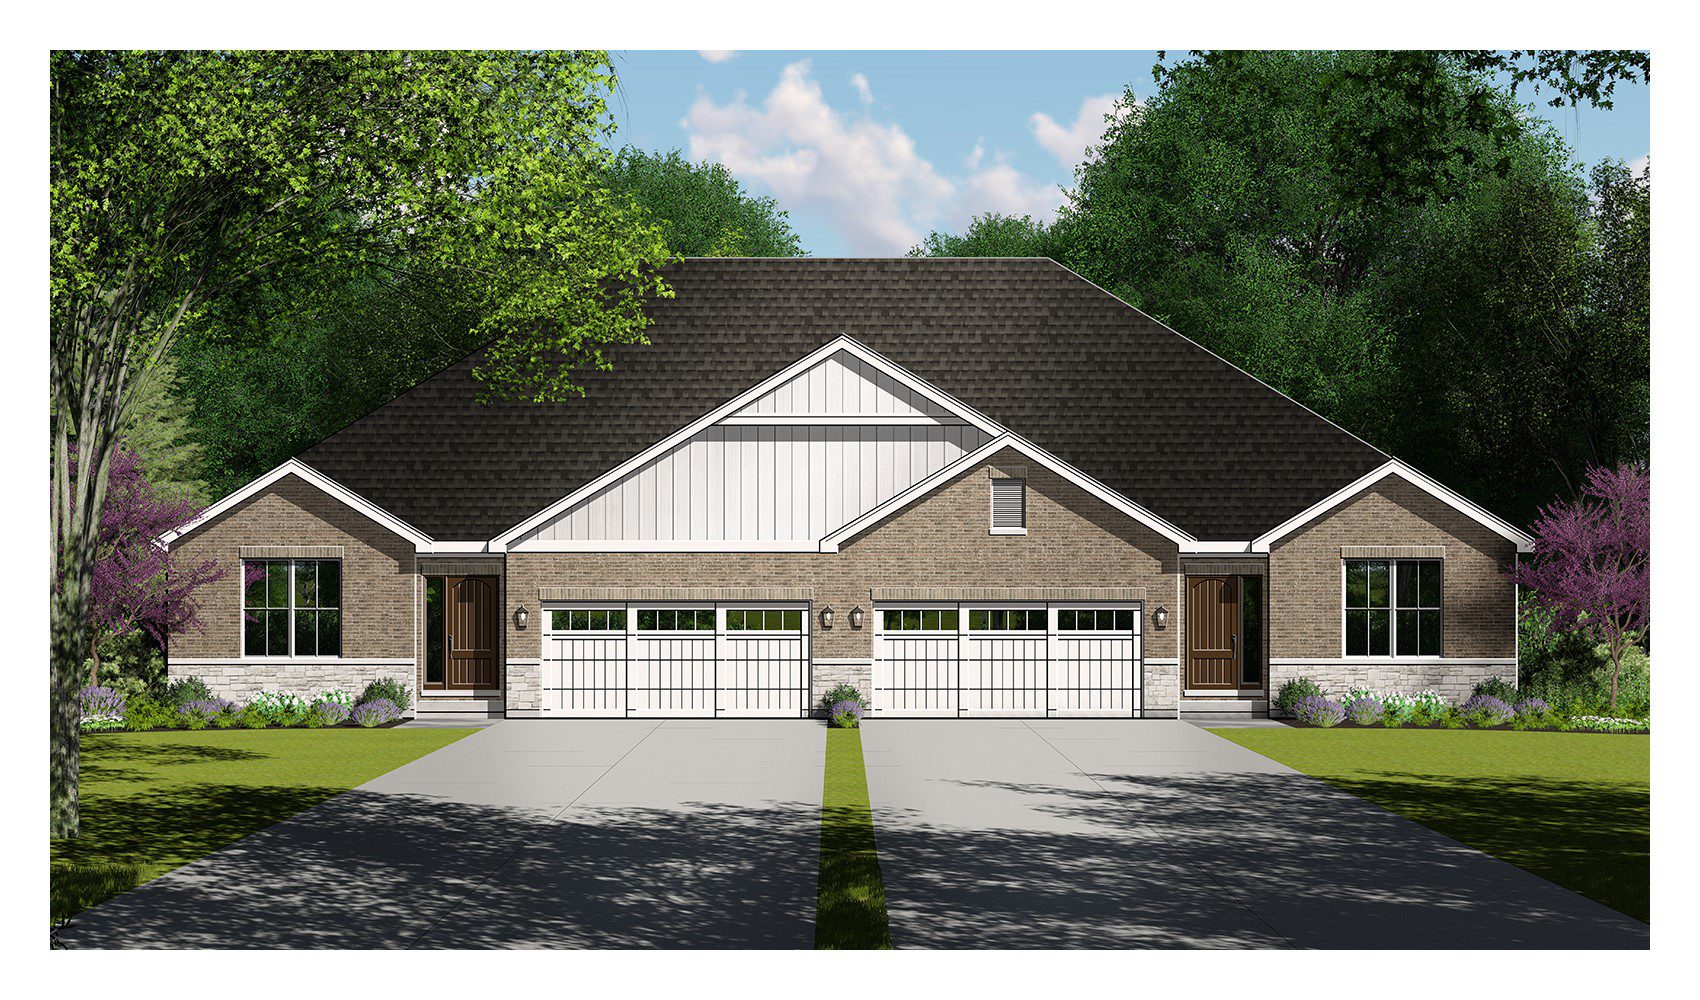 Rendering of the townhomes